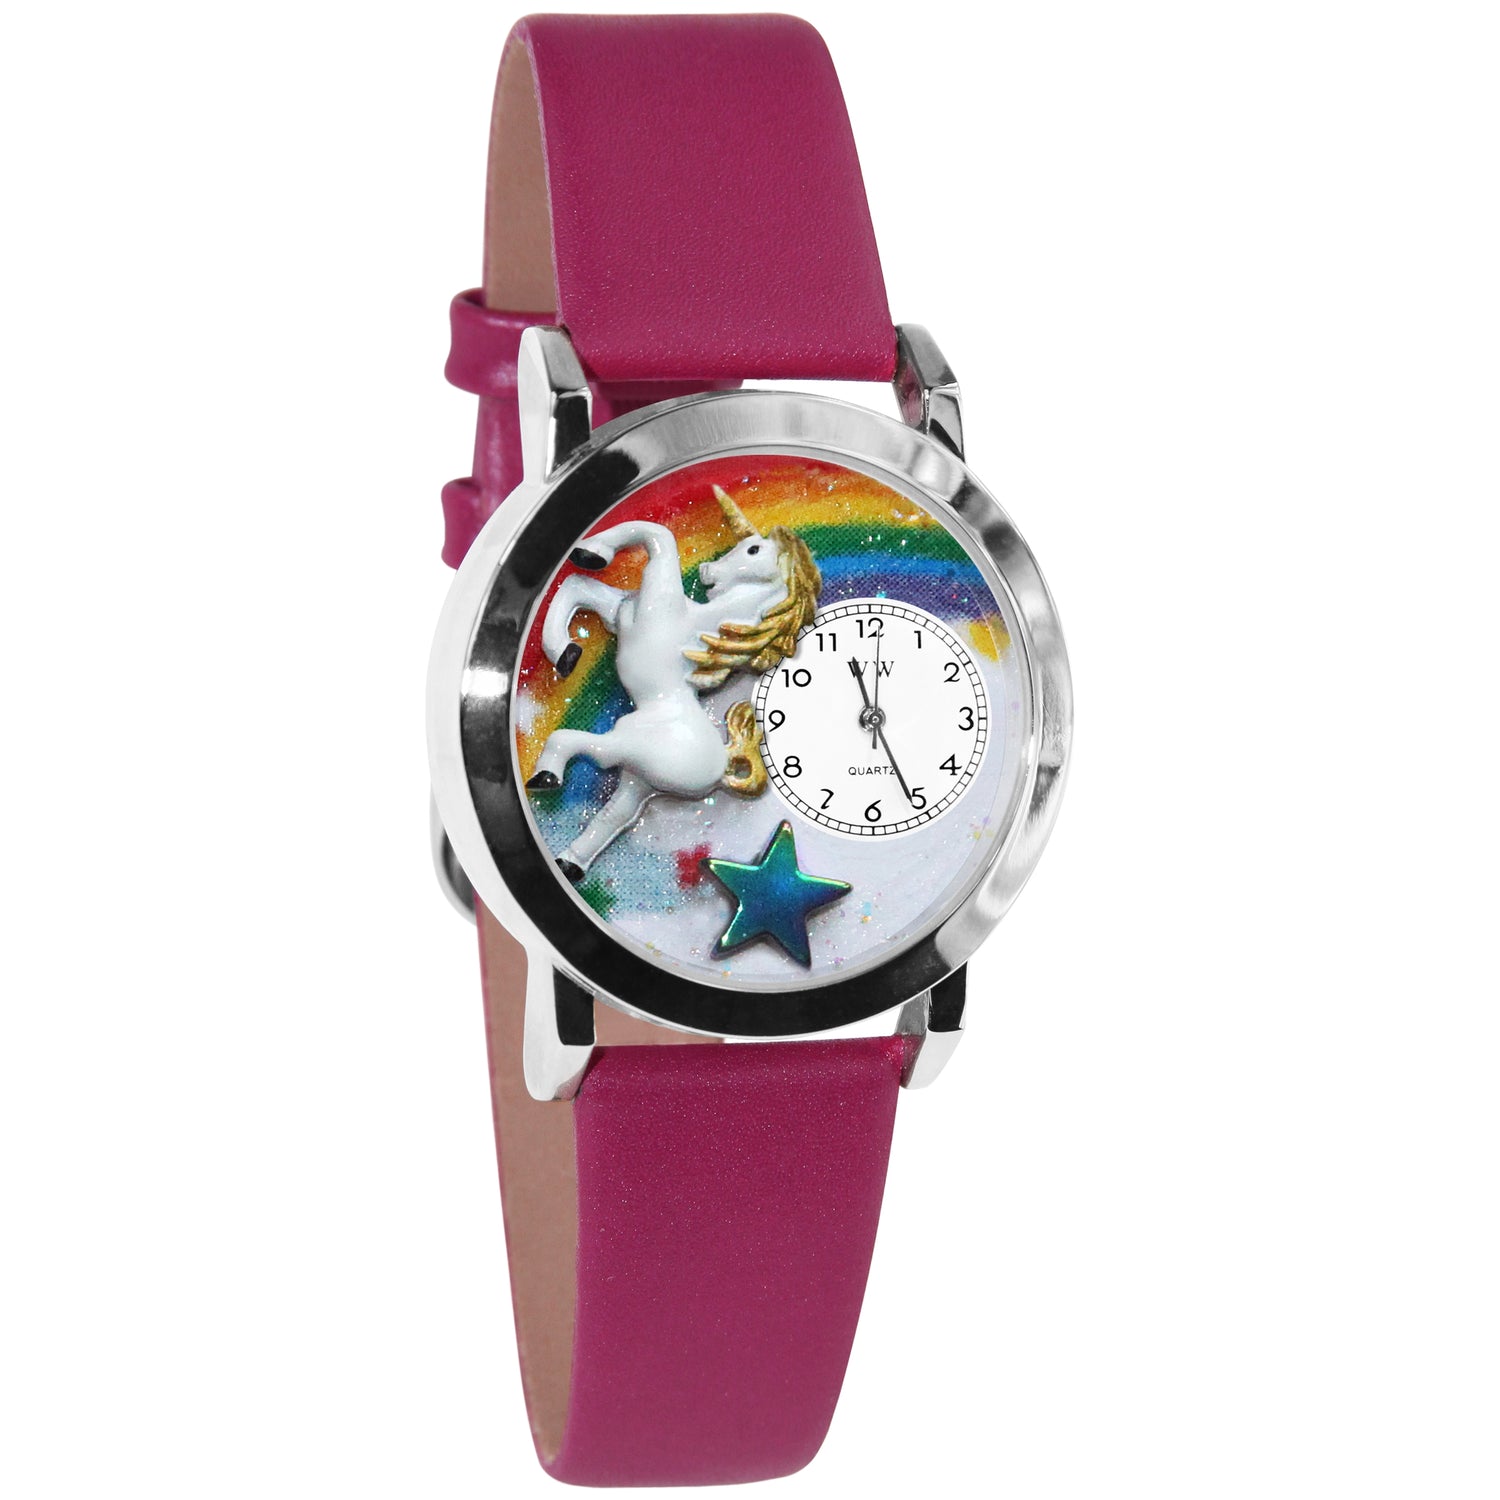 Whimsical Gifts | Unicorn 3D Watch Small Style | Handmade in USA | Fantasy & Mystical |  | Novelty Unique Fun Miniatures Gift | Silver Finish Fuschia Leather Watch Band